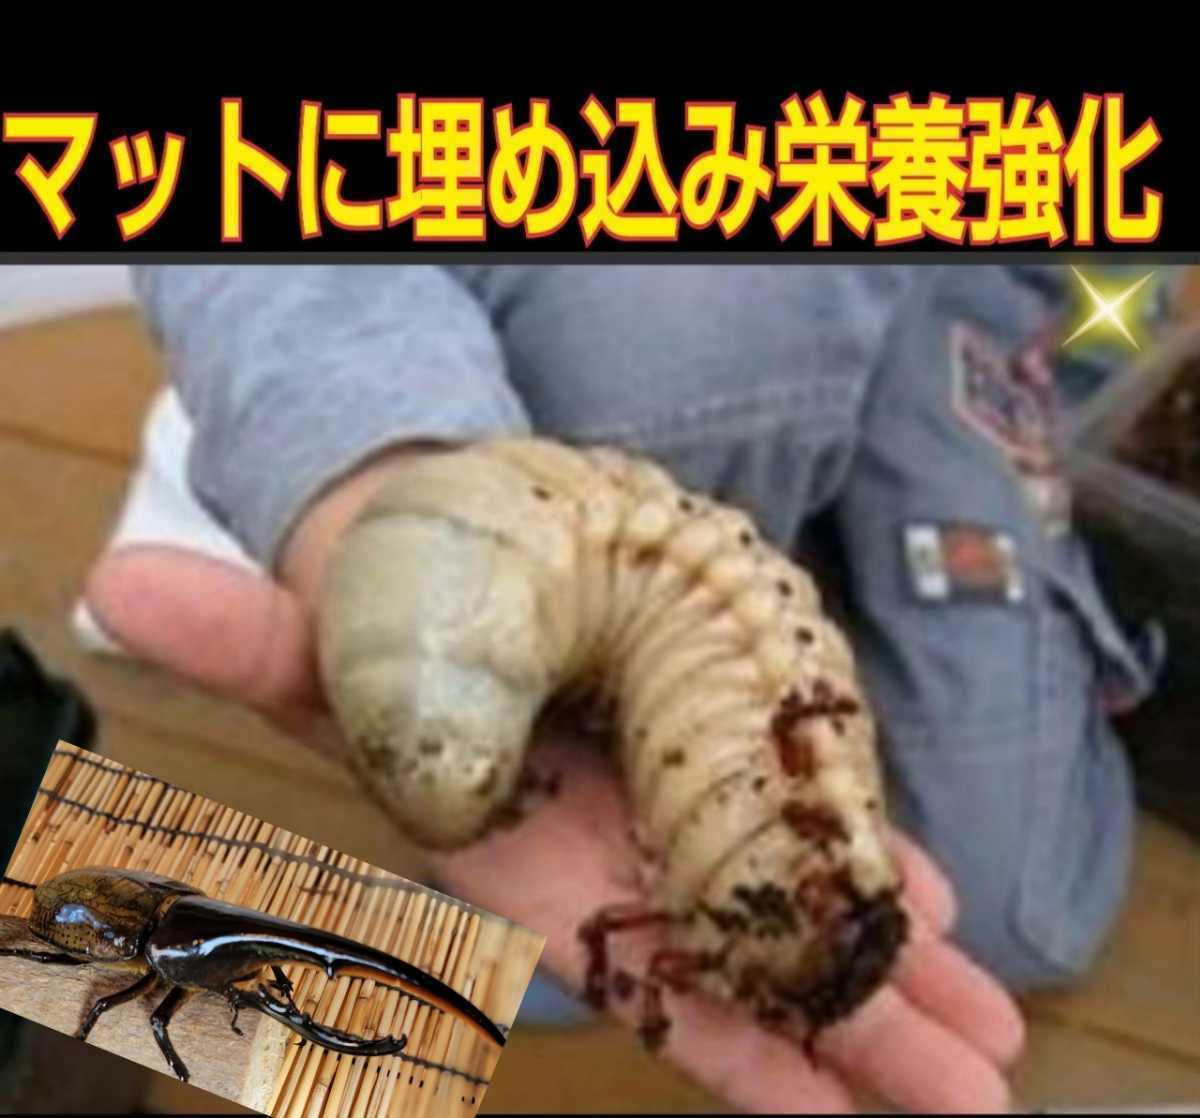  rhinoceros beetle larva. nutrition strengthen . eminent! extra-large 3500cc*ki jellyfish . floor block block. .. mat . embed only! stag beetle. production egg floor also possible to use!